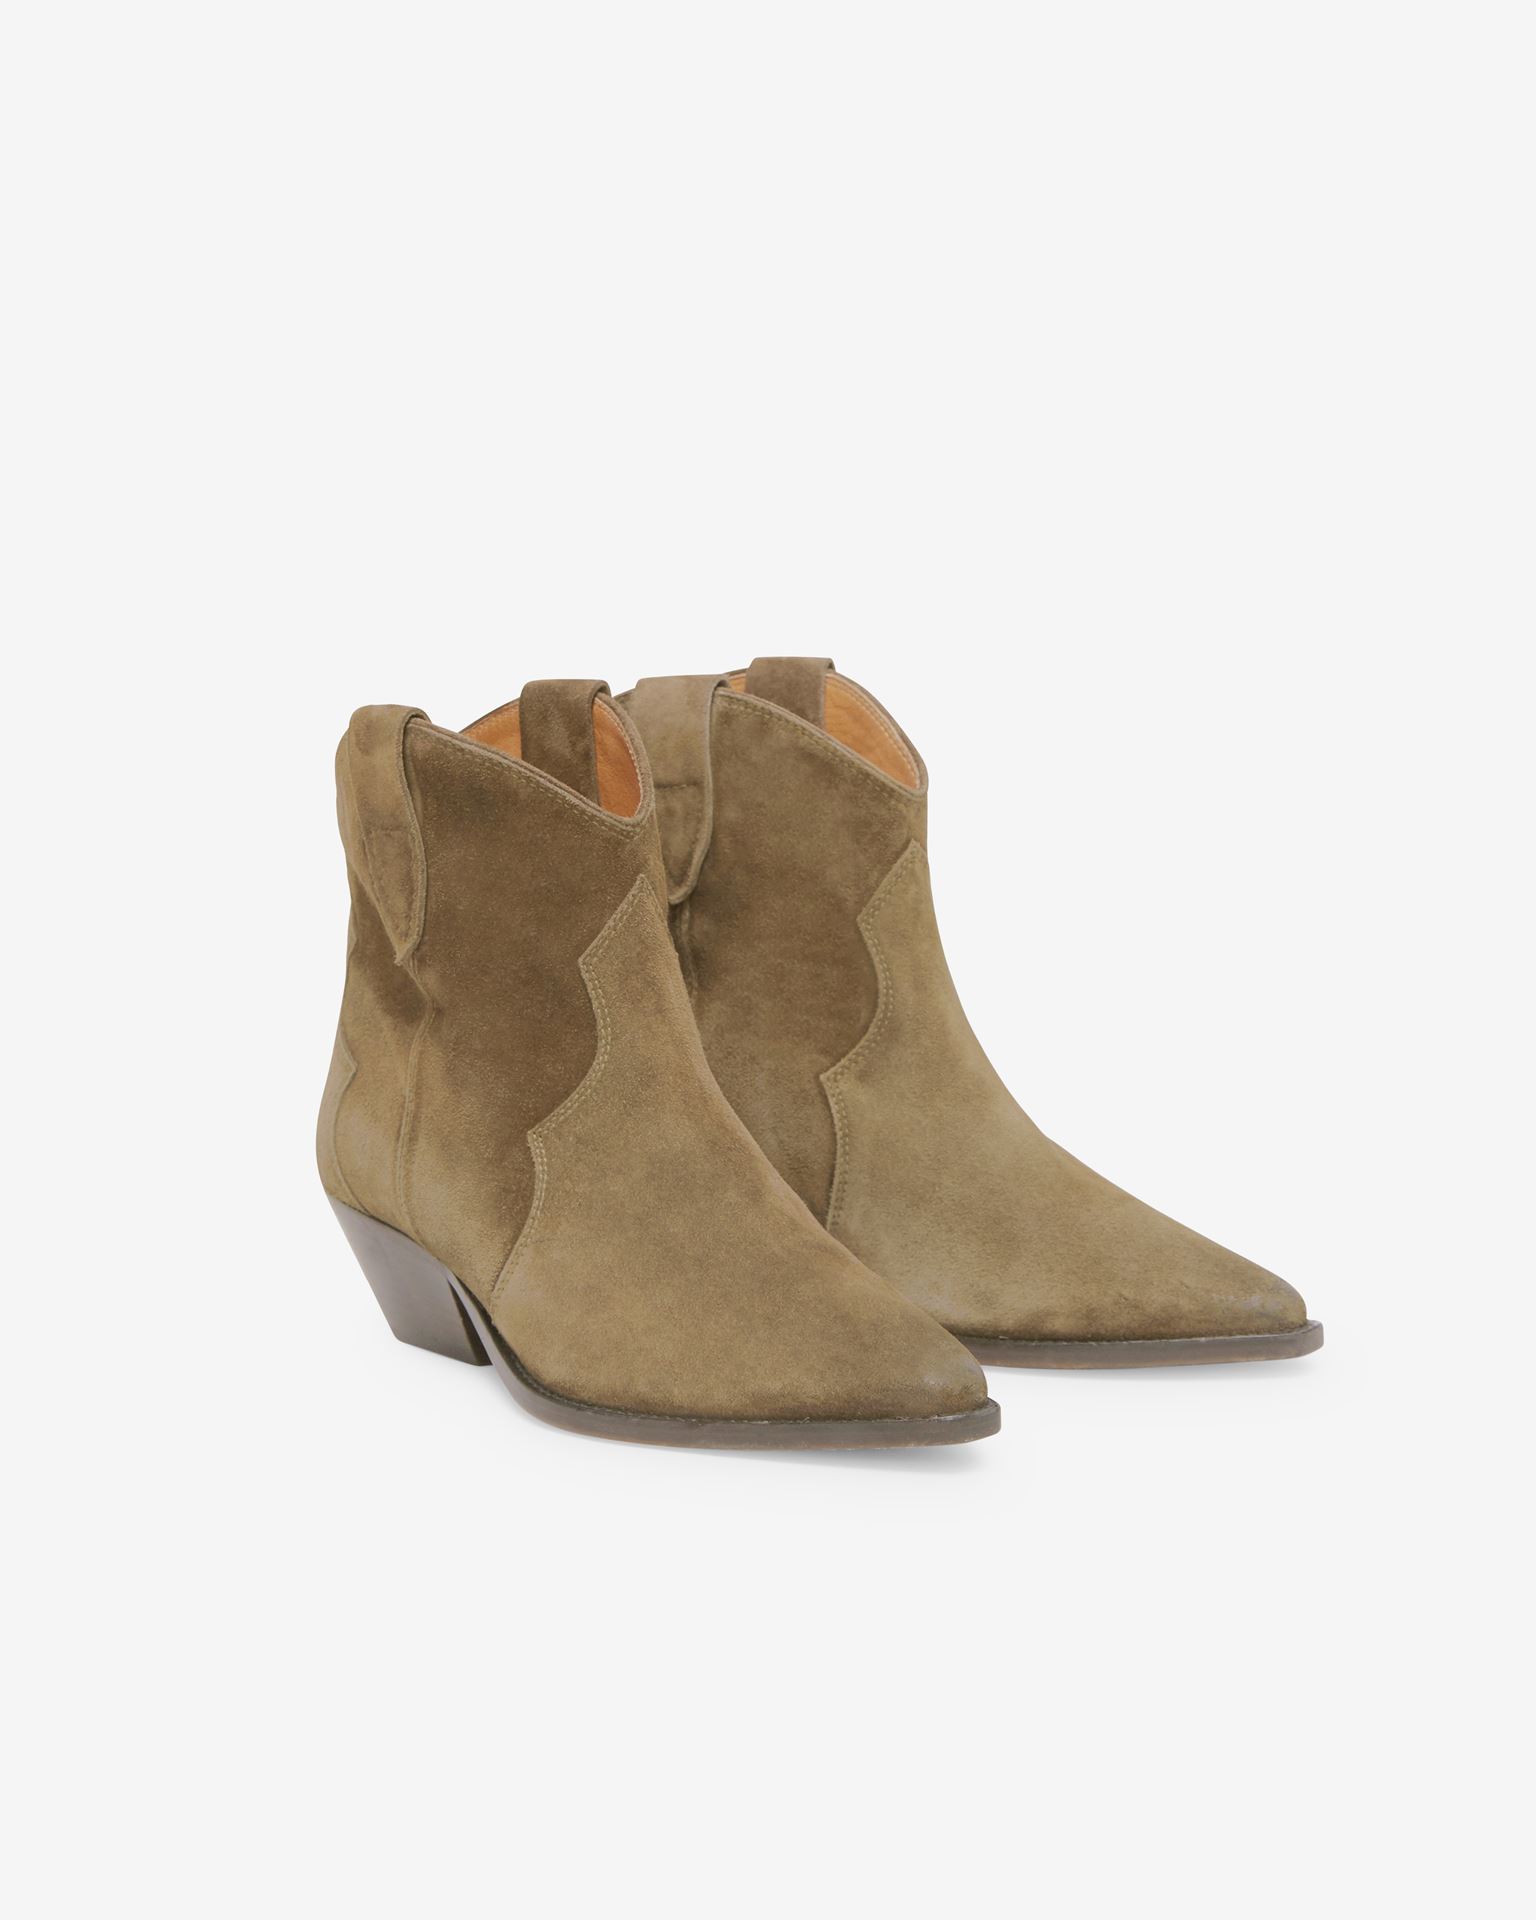 Isabel Marant, Dewina Leather Ankle Boots - Women - Brown